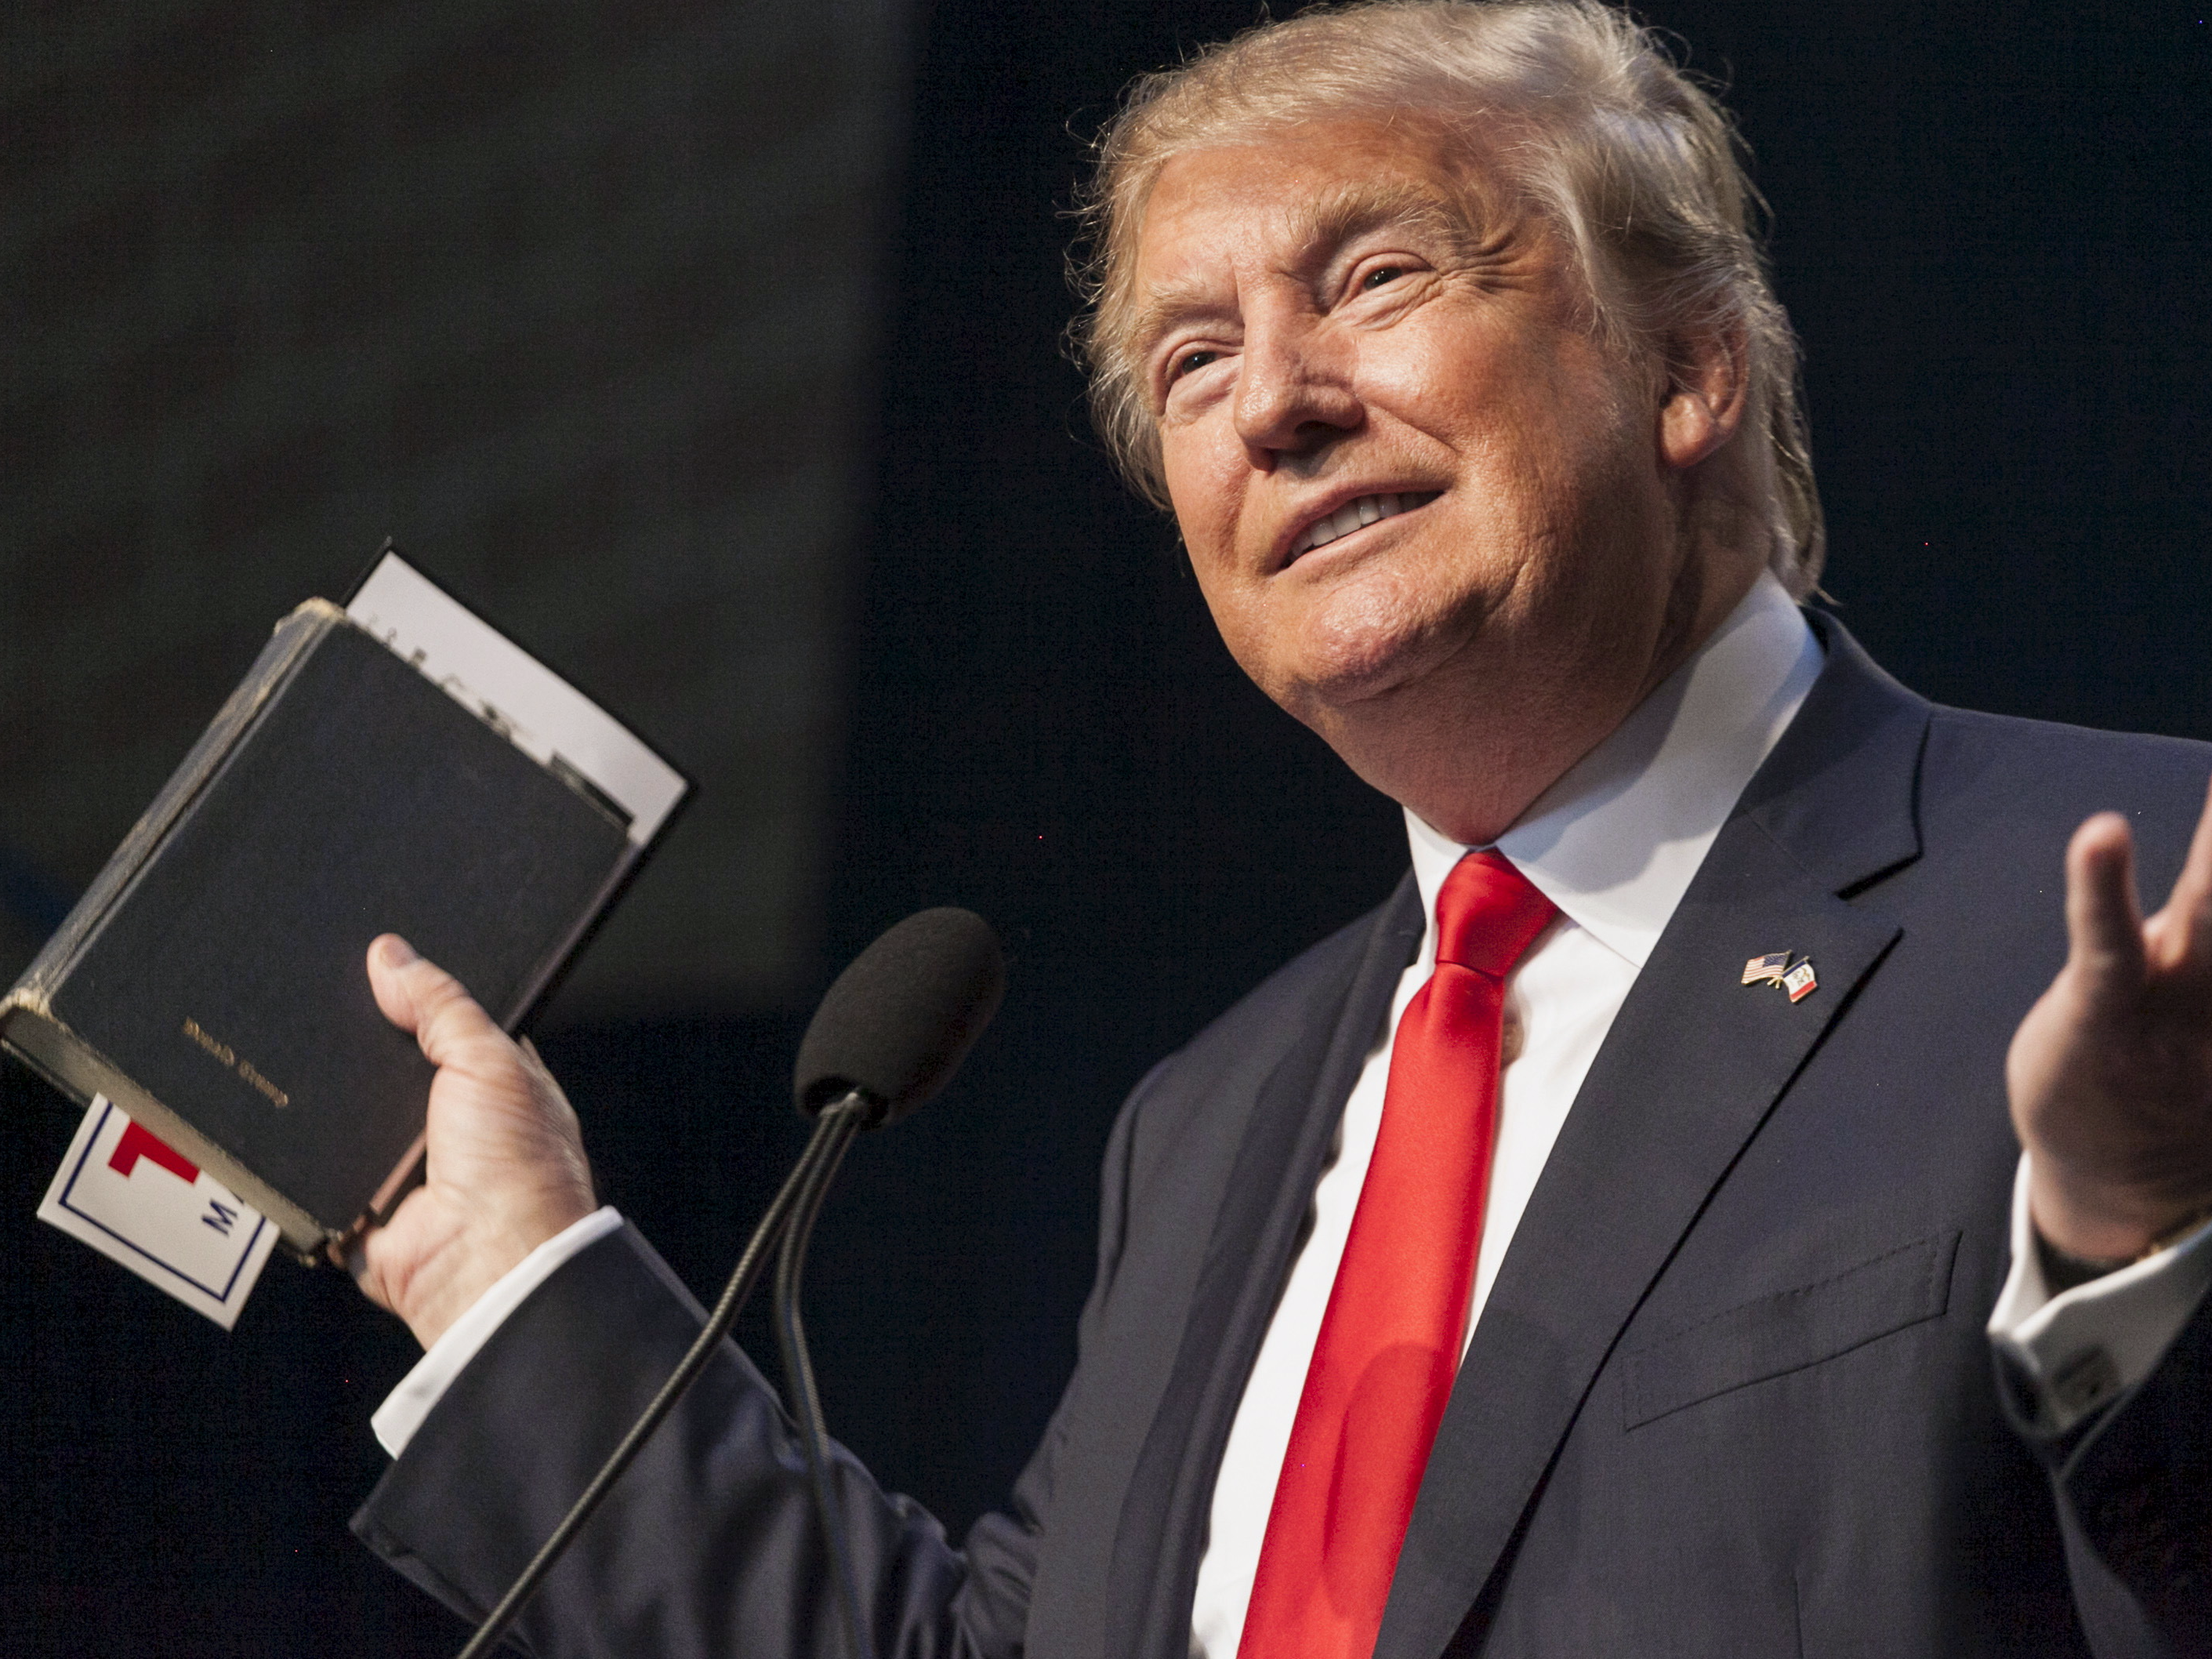 If I'm president, 'Christianity will have power' in the US: Trump